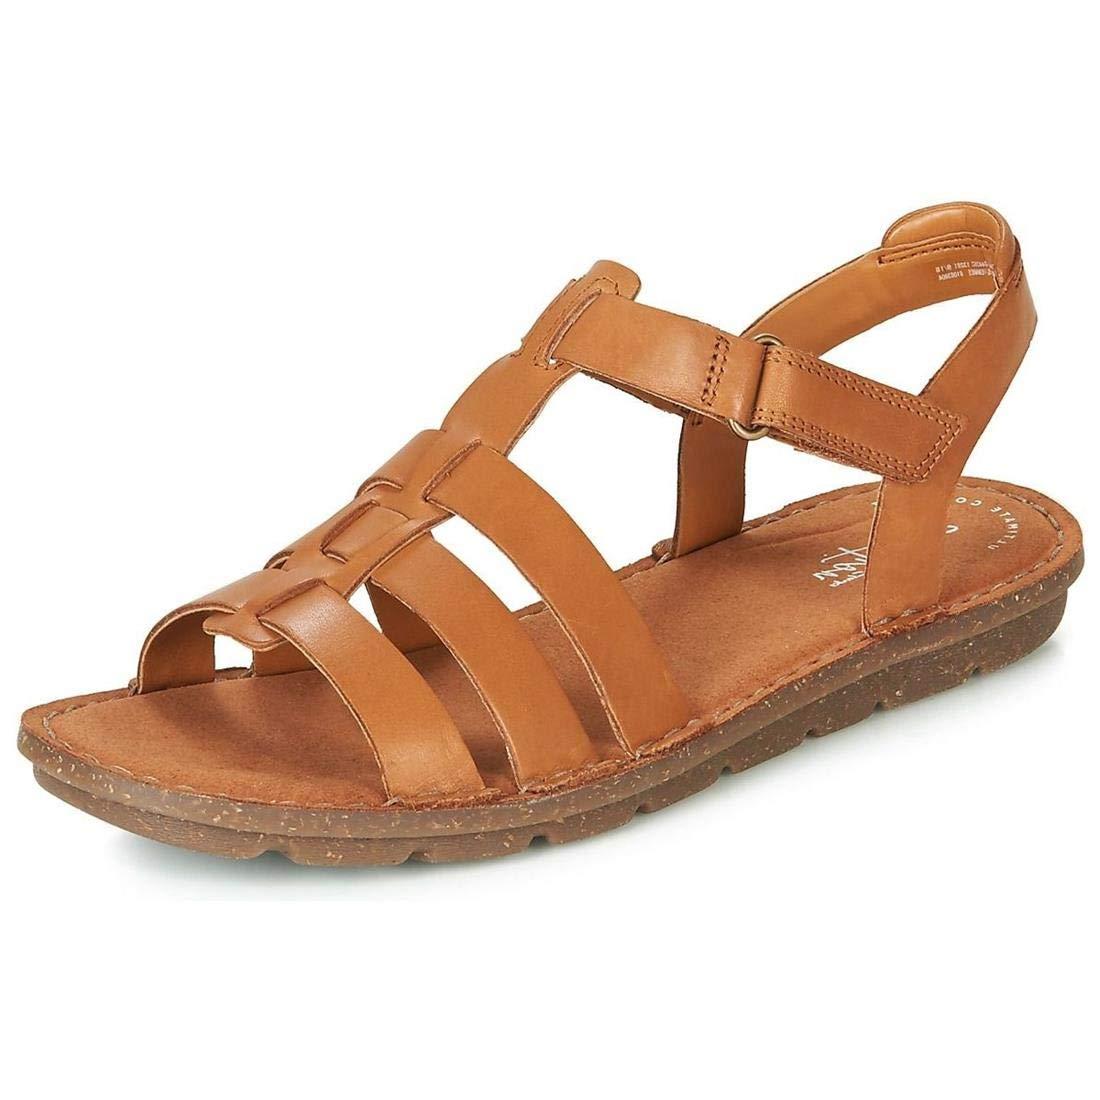 Clarks Leather Blake Jewel S Strappy Sandals 5 Uk Brown - Save 50% - Lyst